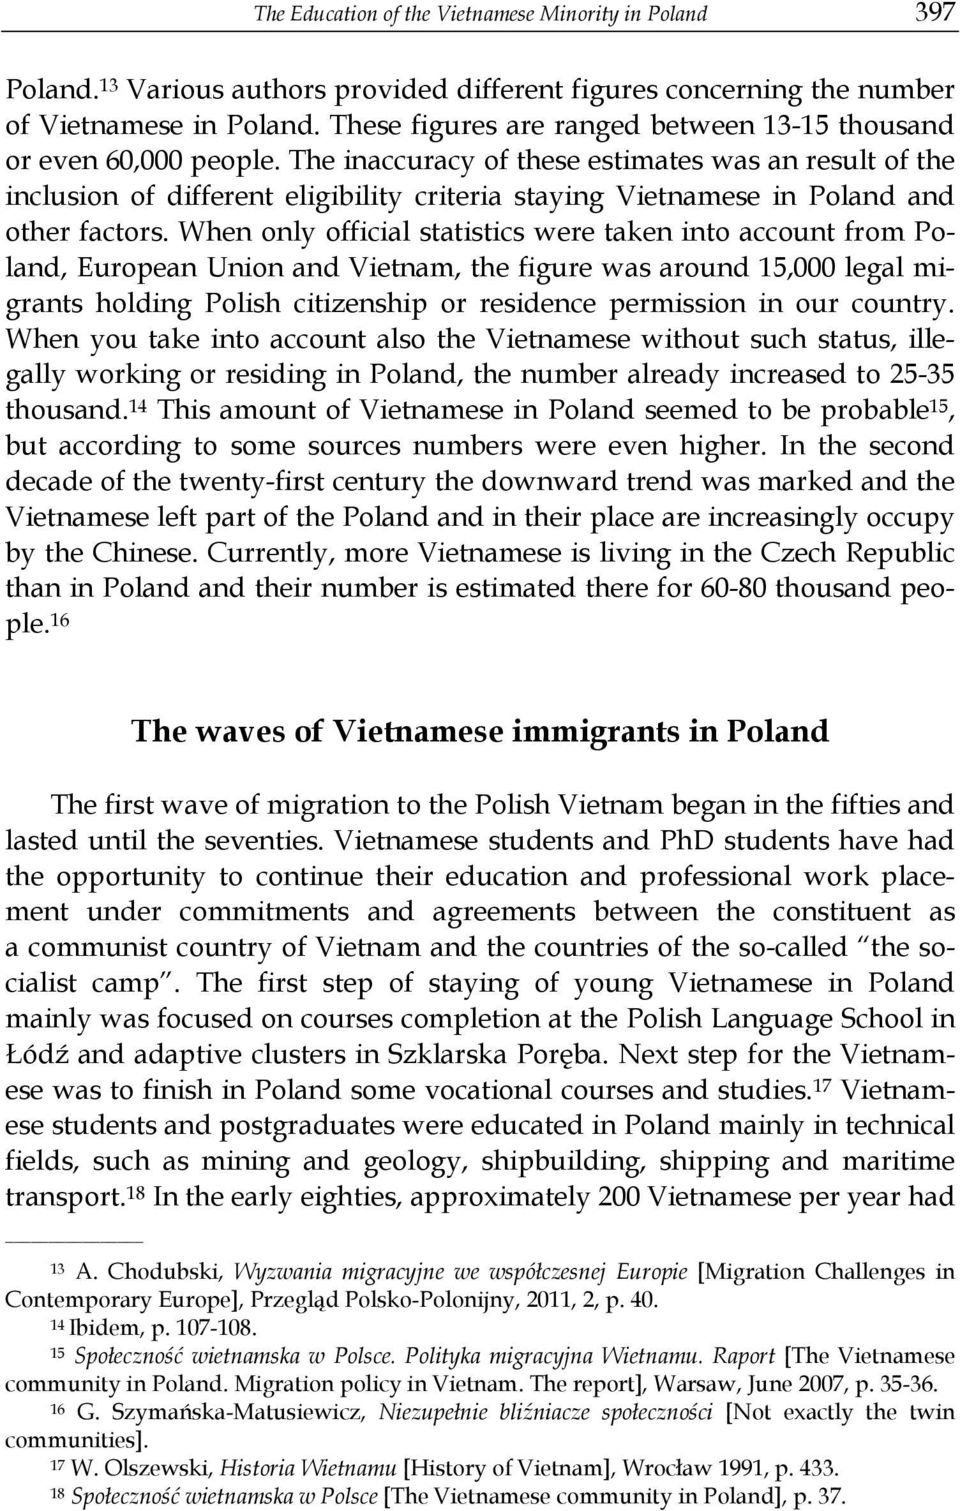 The inaccuracy of these estimates was an result of the inclusion of different eligibility criteria staying Vietnamese in Poland and other factors.